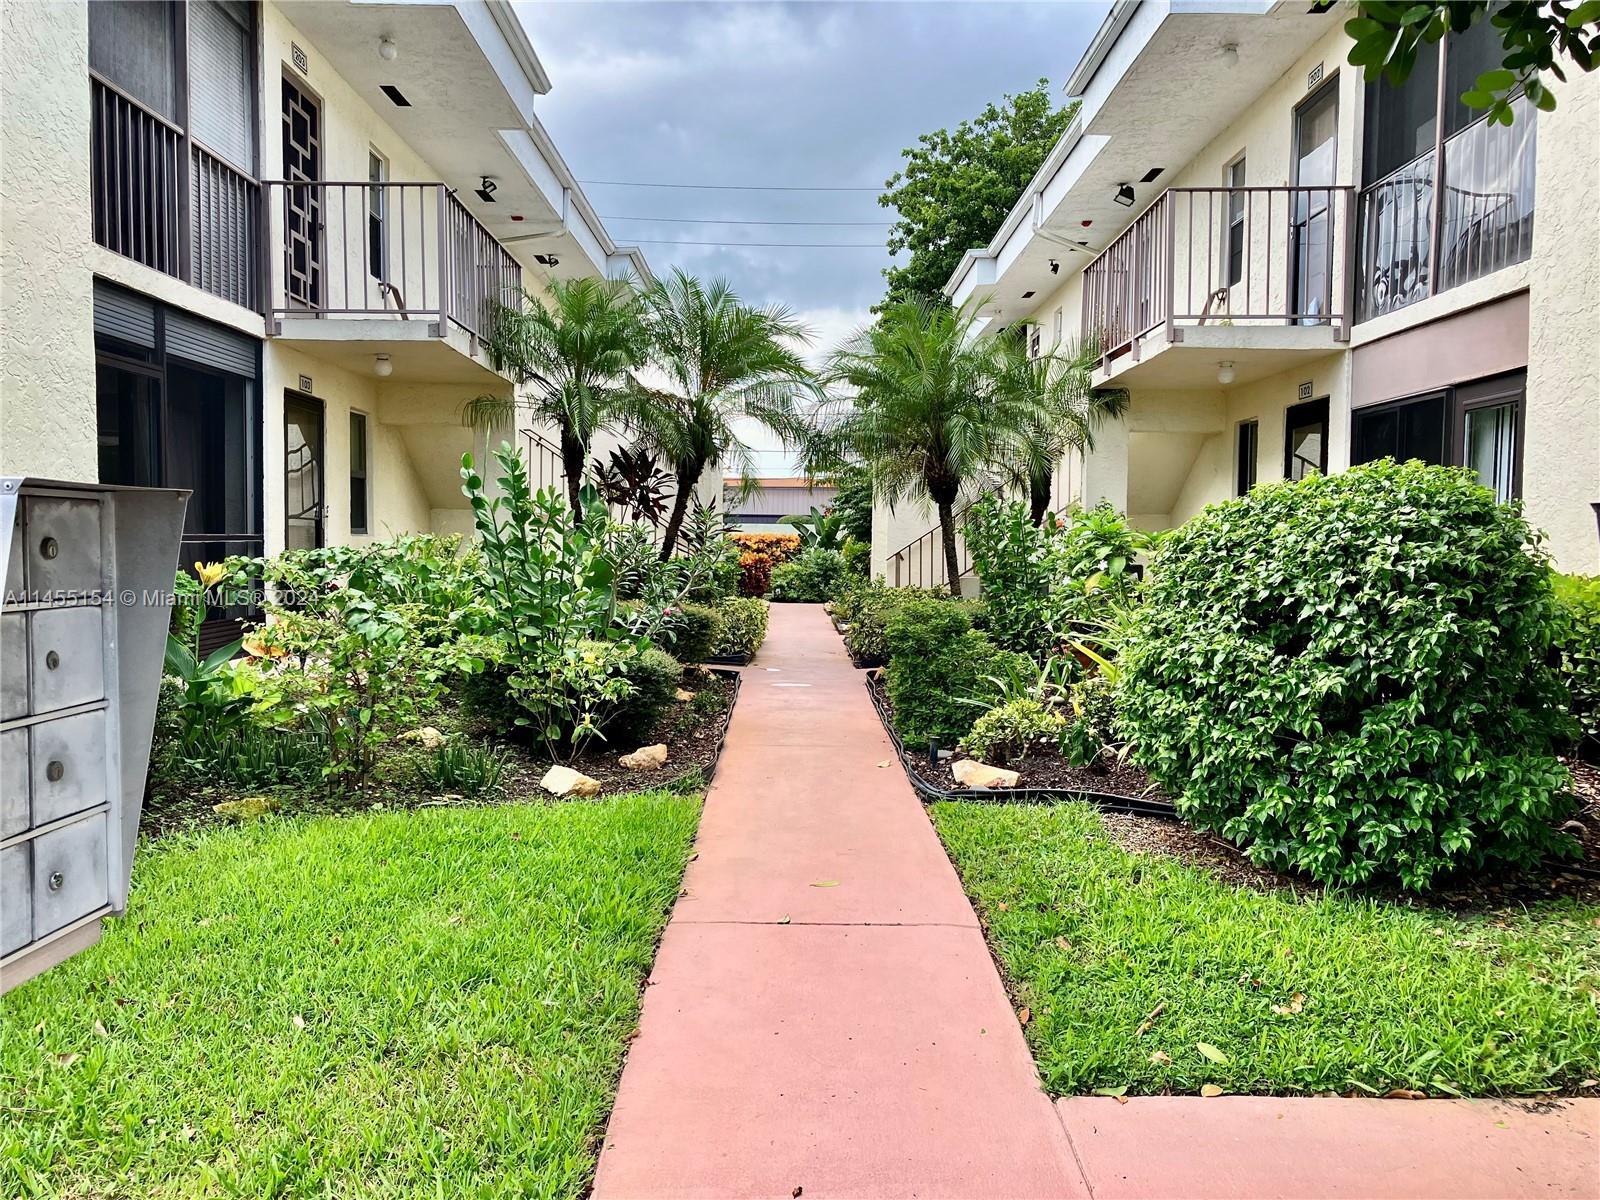 Photo of 14893 Wedgefield Dr #204 in Delray Beach, FL